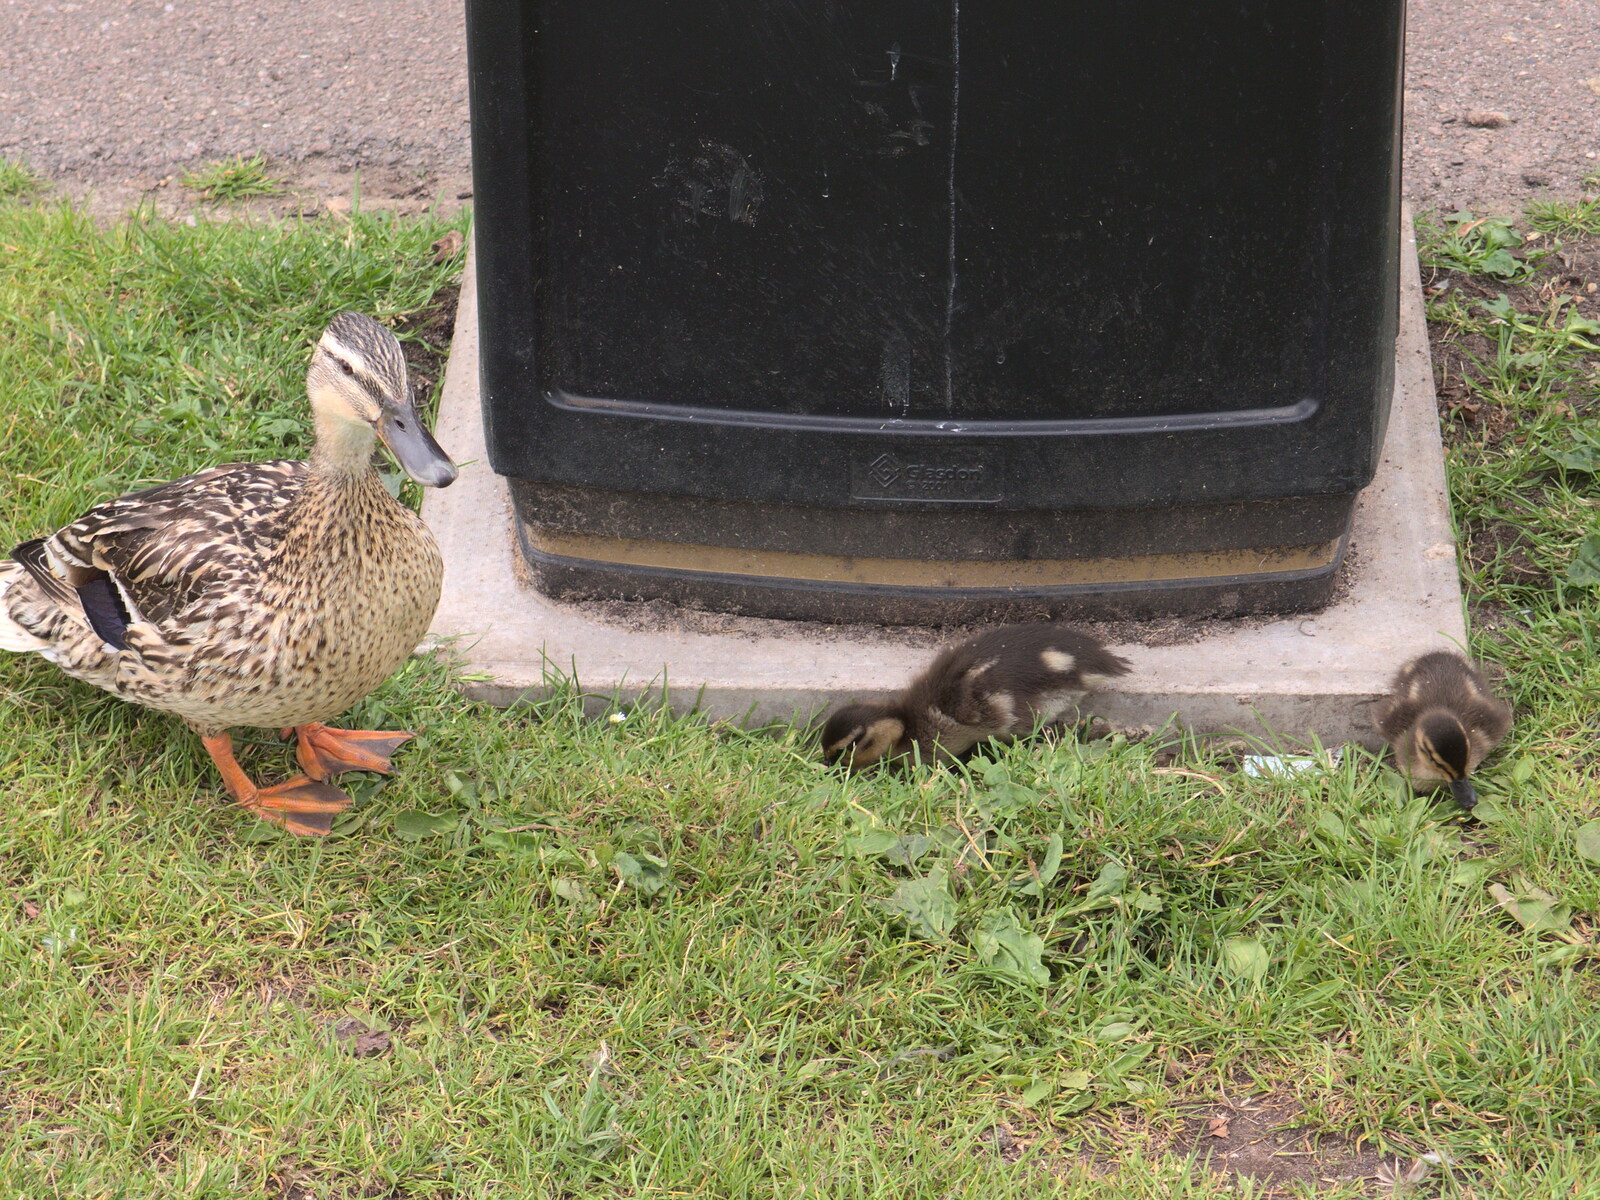 Fluffy ducklings hang out by the bins from A visit from Da Gorls, Brome, Suffolk - 27th June 2015